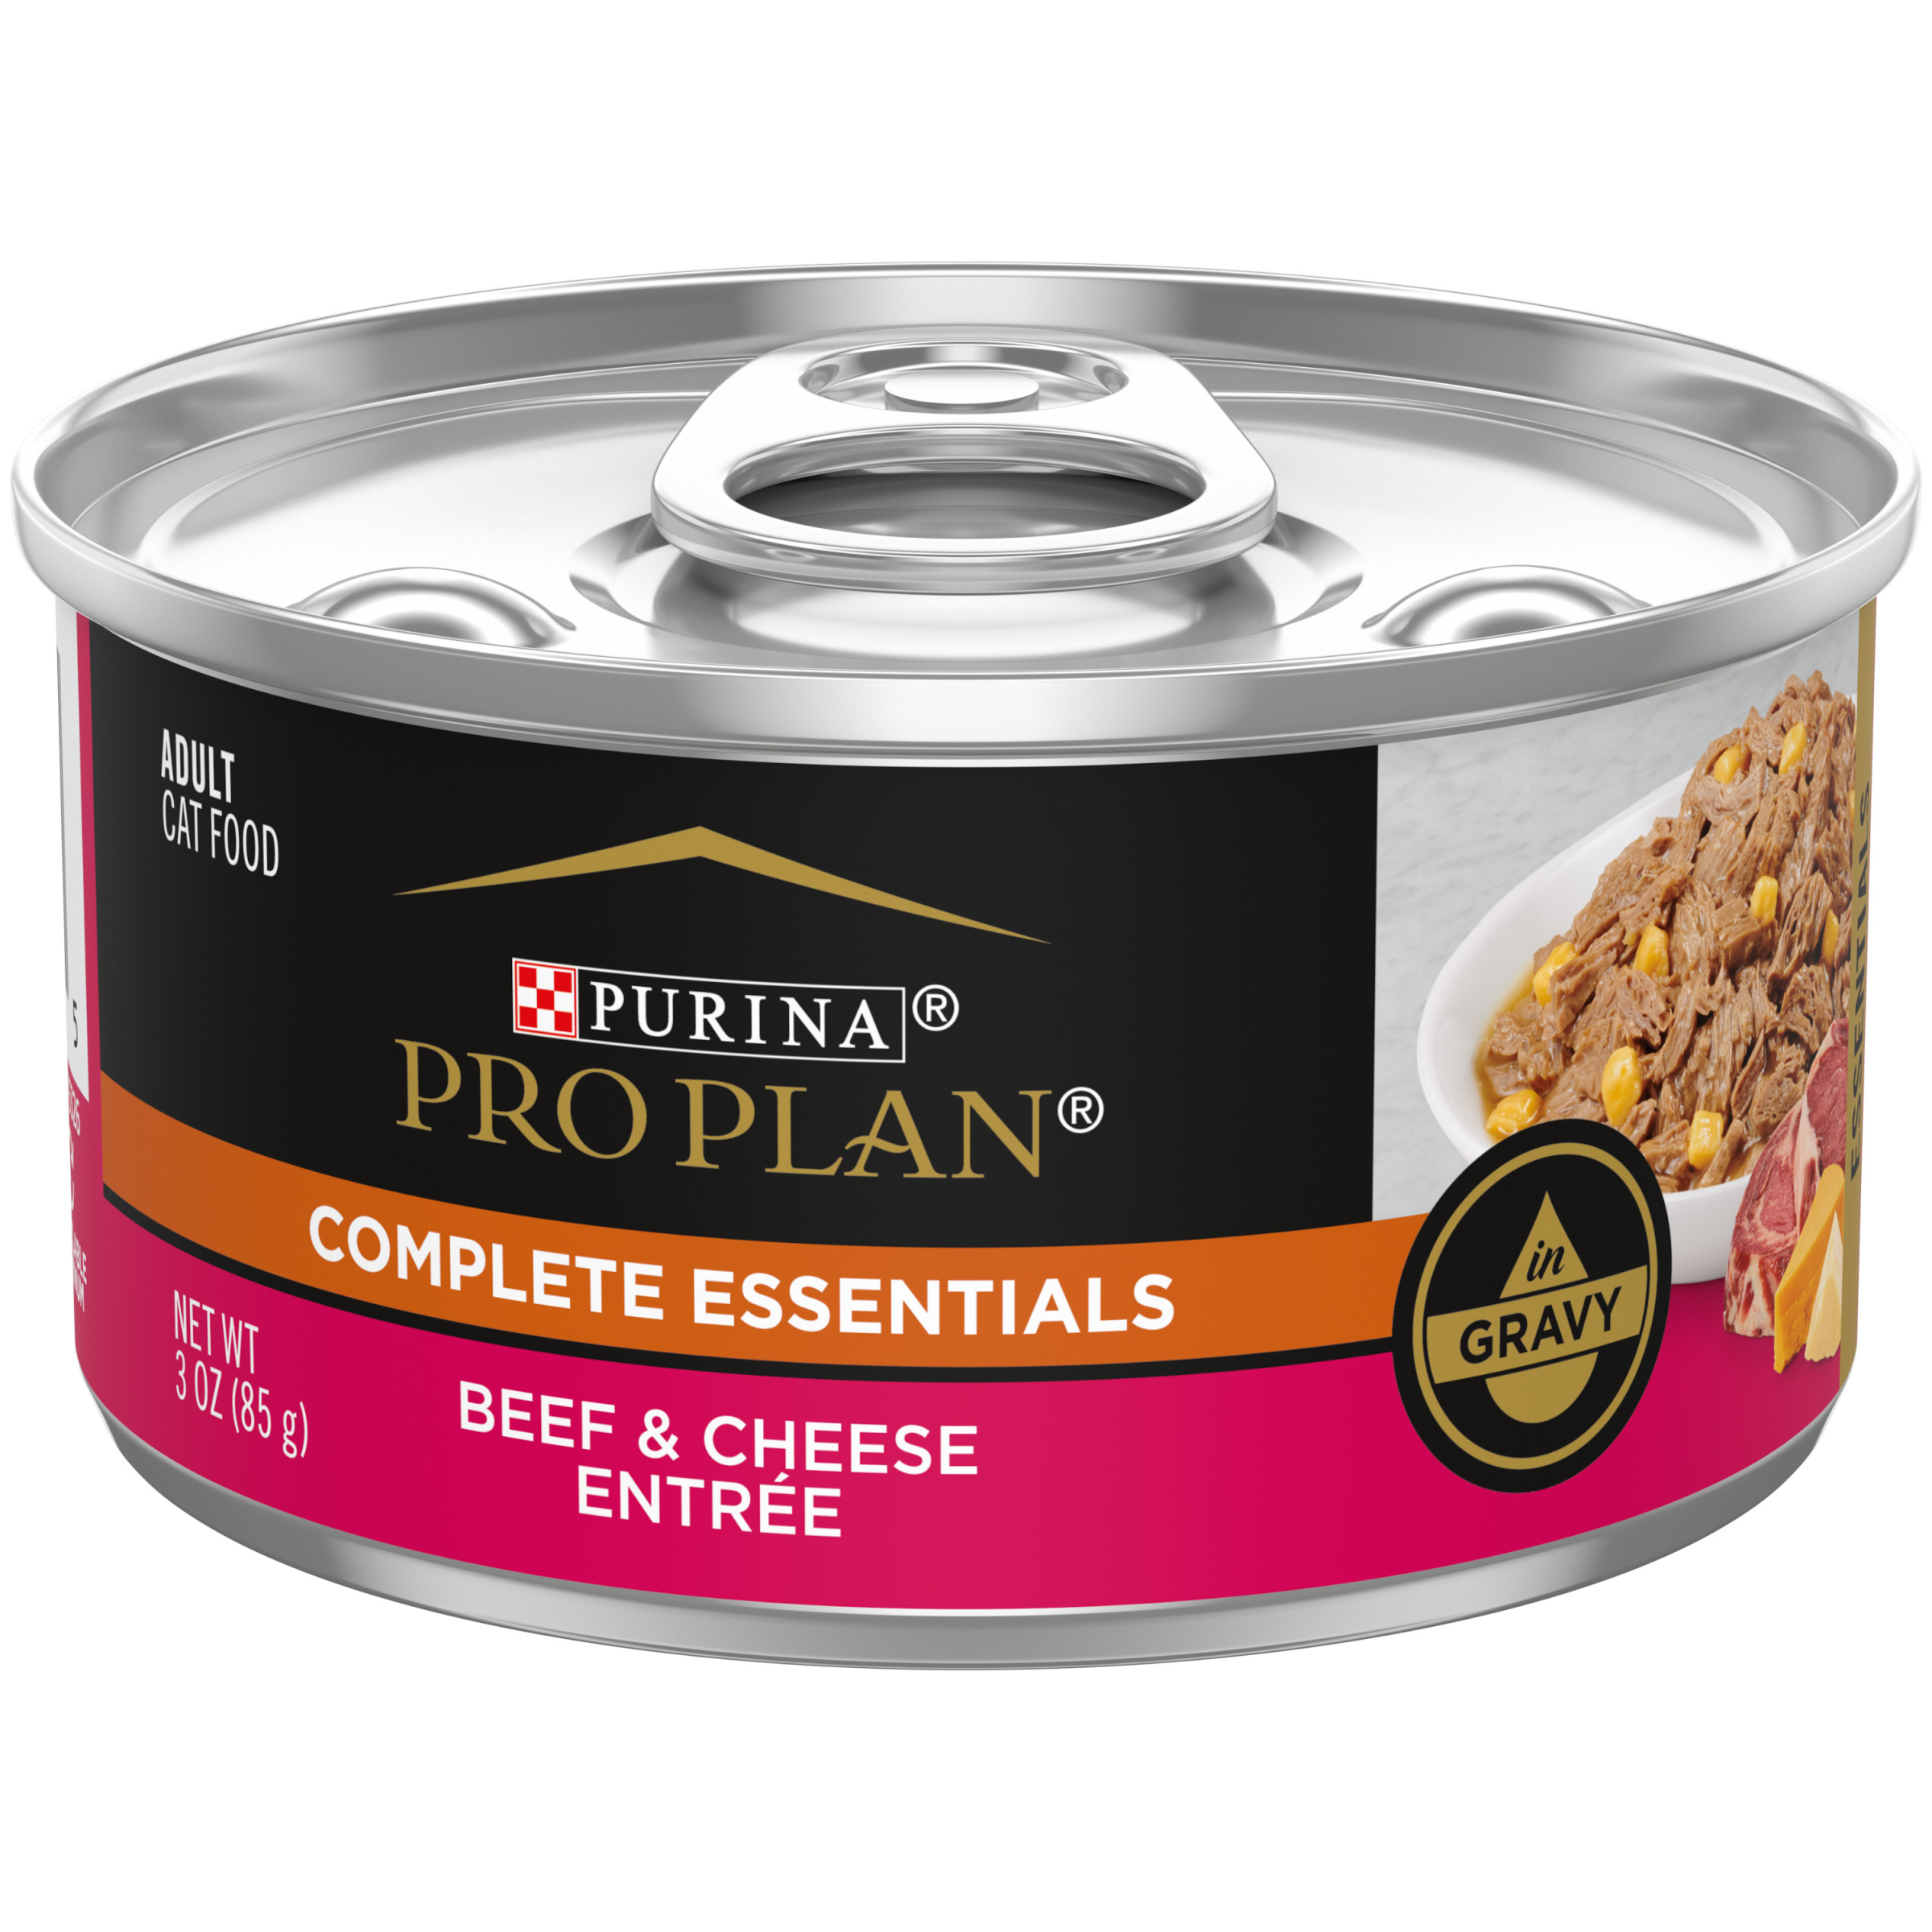 Purina Pro Plan Complete Essentials Wet Cat Food Beef Cheese, 3 oz Cans (24 Pack) - image 1 of 10